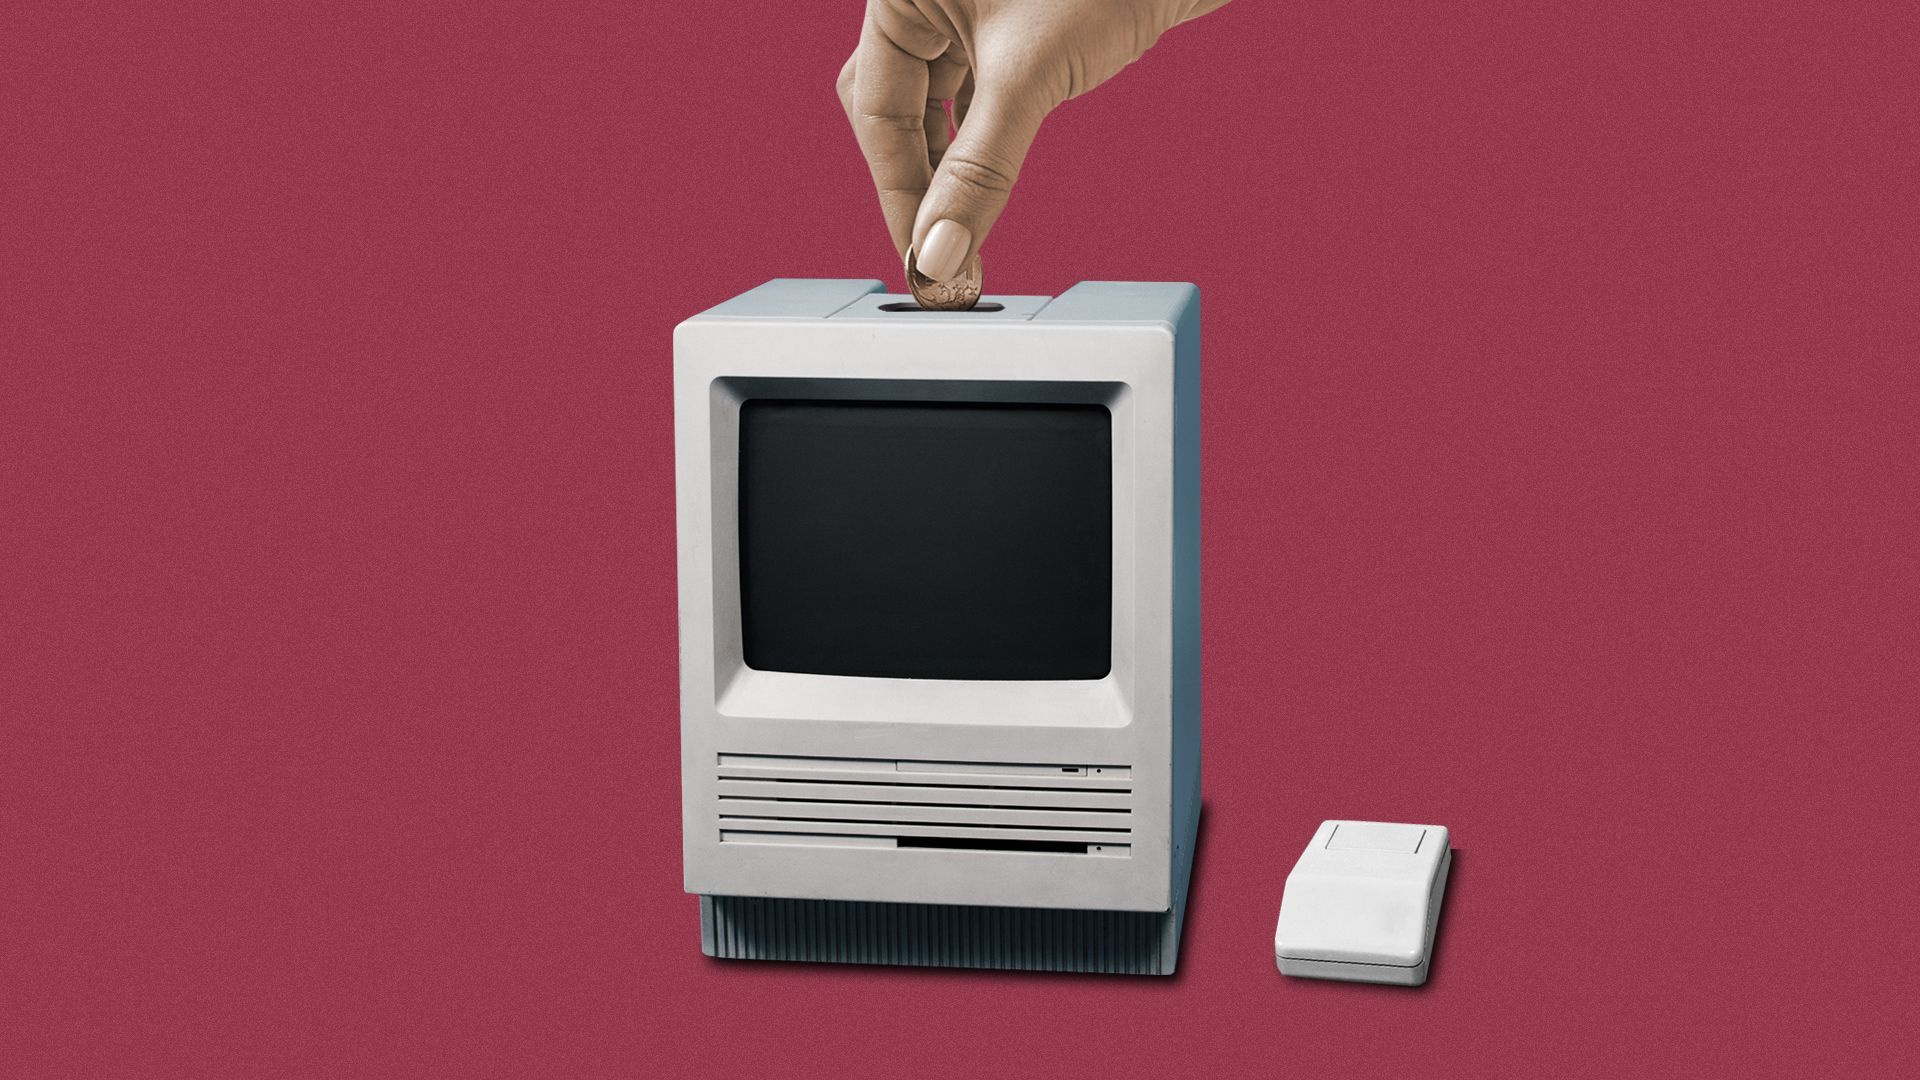 Illustration of a hand inserting a coin into a piggy bank slot in a computer